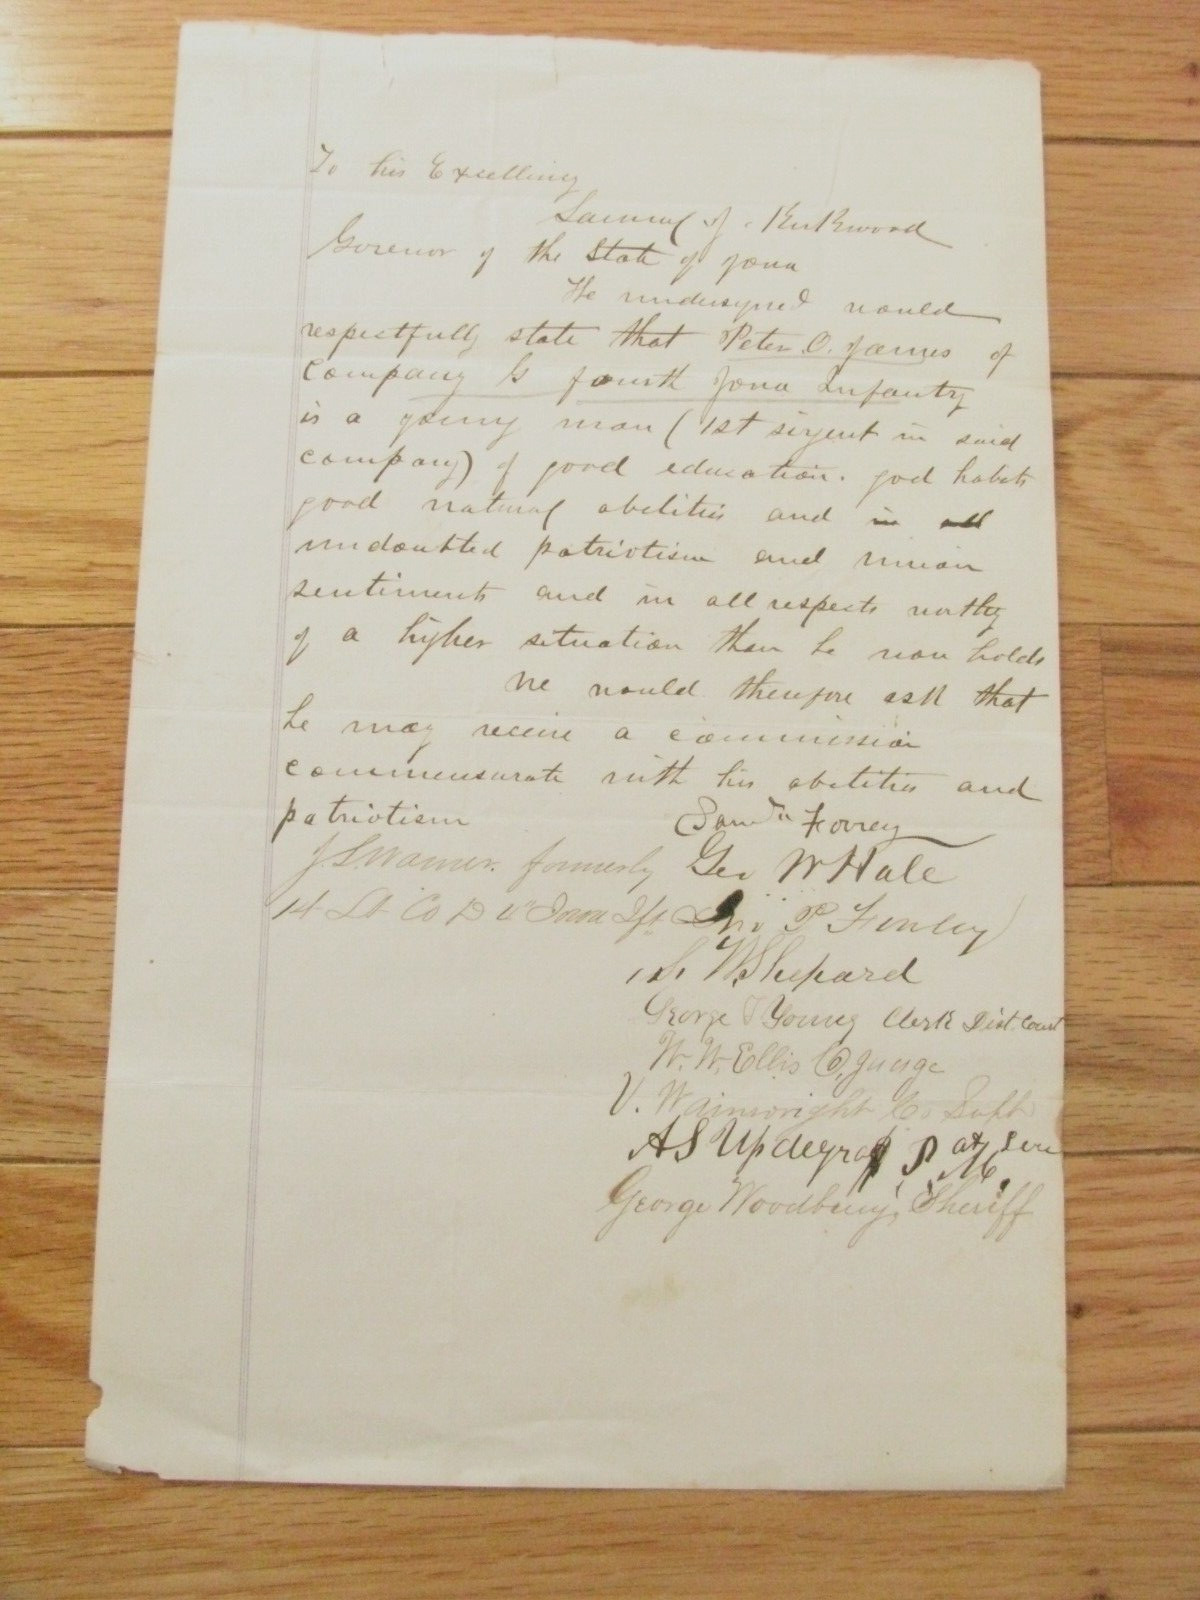 4th IOWA CIVIL WAR PROMOTION PETITION TO GOVERNOR KIRKWOOD 1864